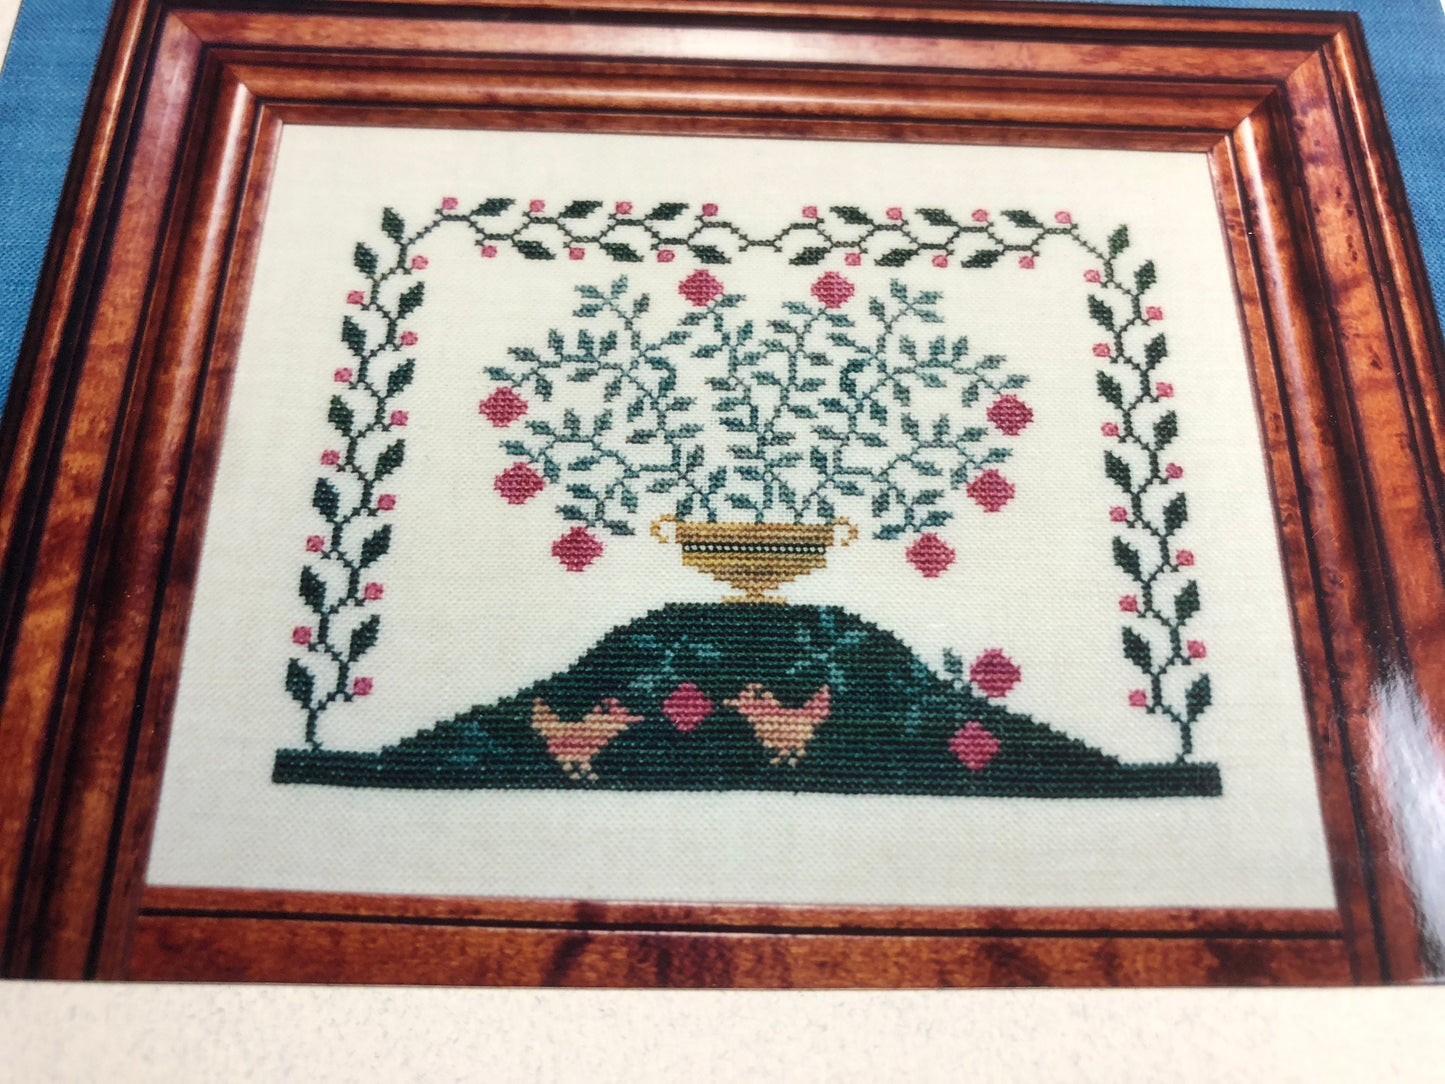 The Gentle Art, Berry Vines, Vintage 1994, Counted, Cross Stitch Pattern, Stitch Count 110 by 83